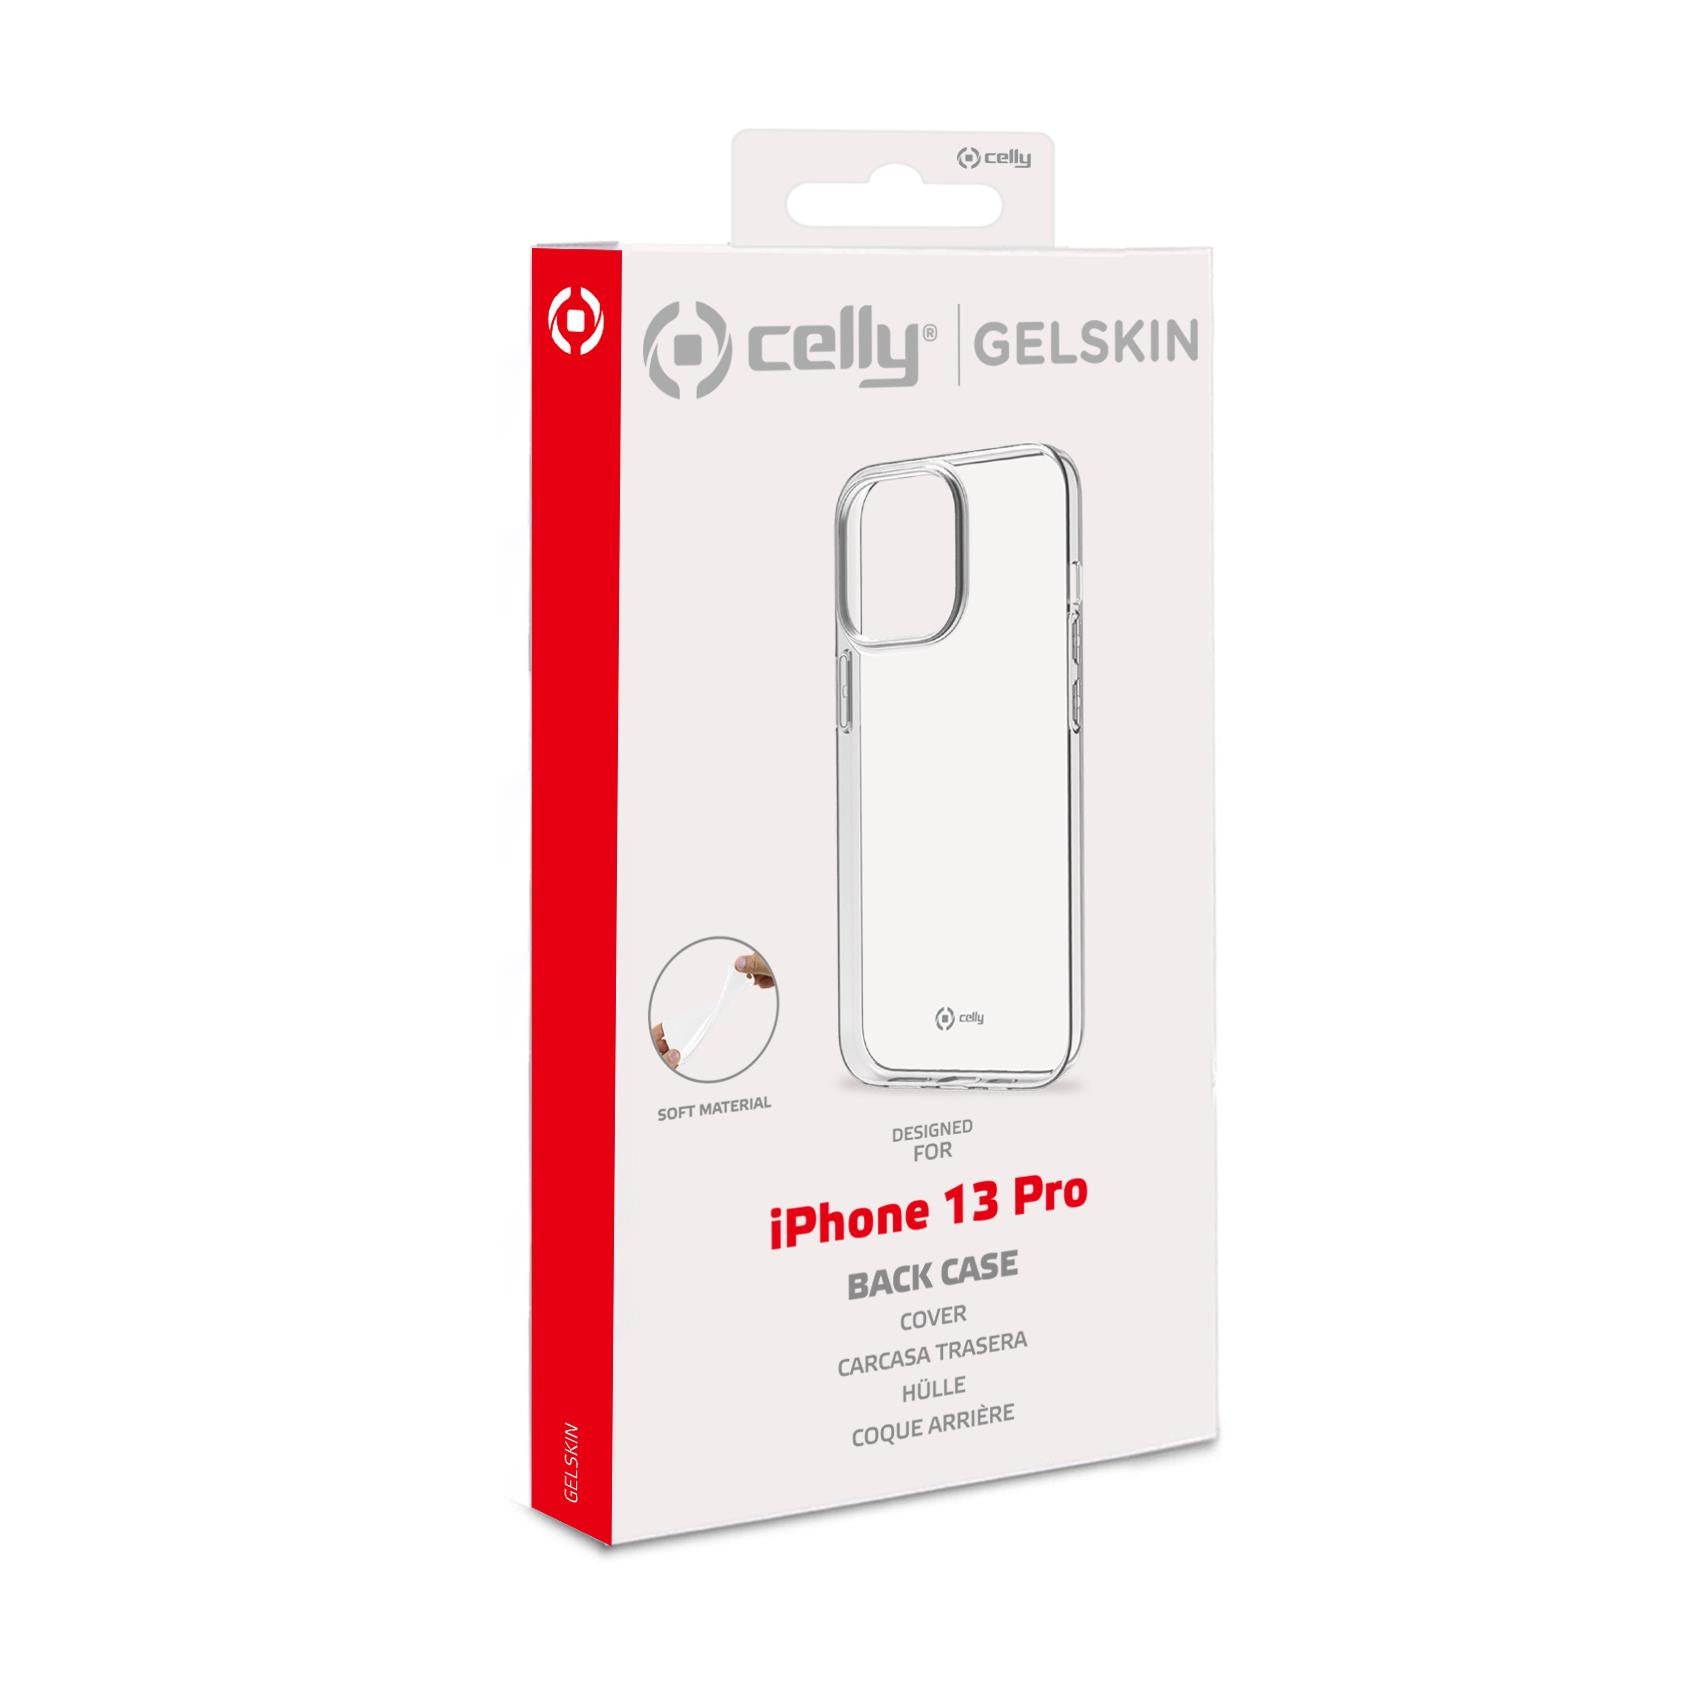 Celly GELSKIN TPU COVER IPHONE 13 PRO